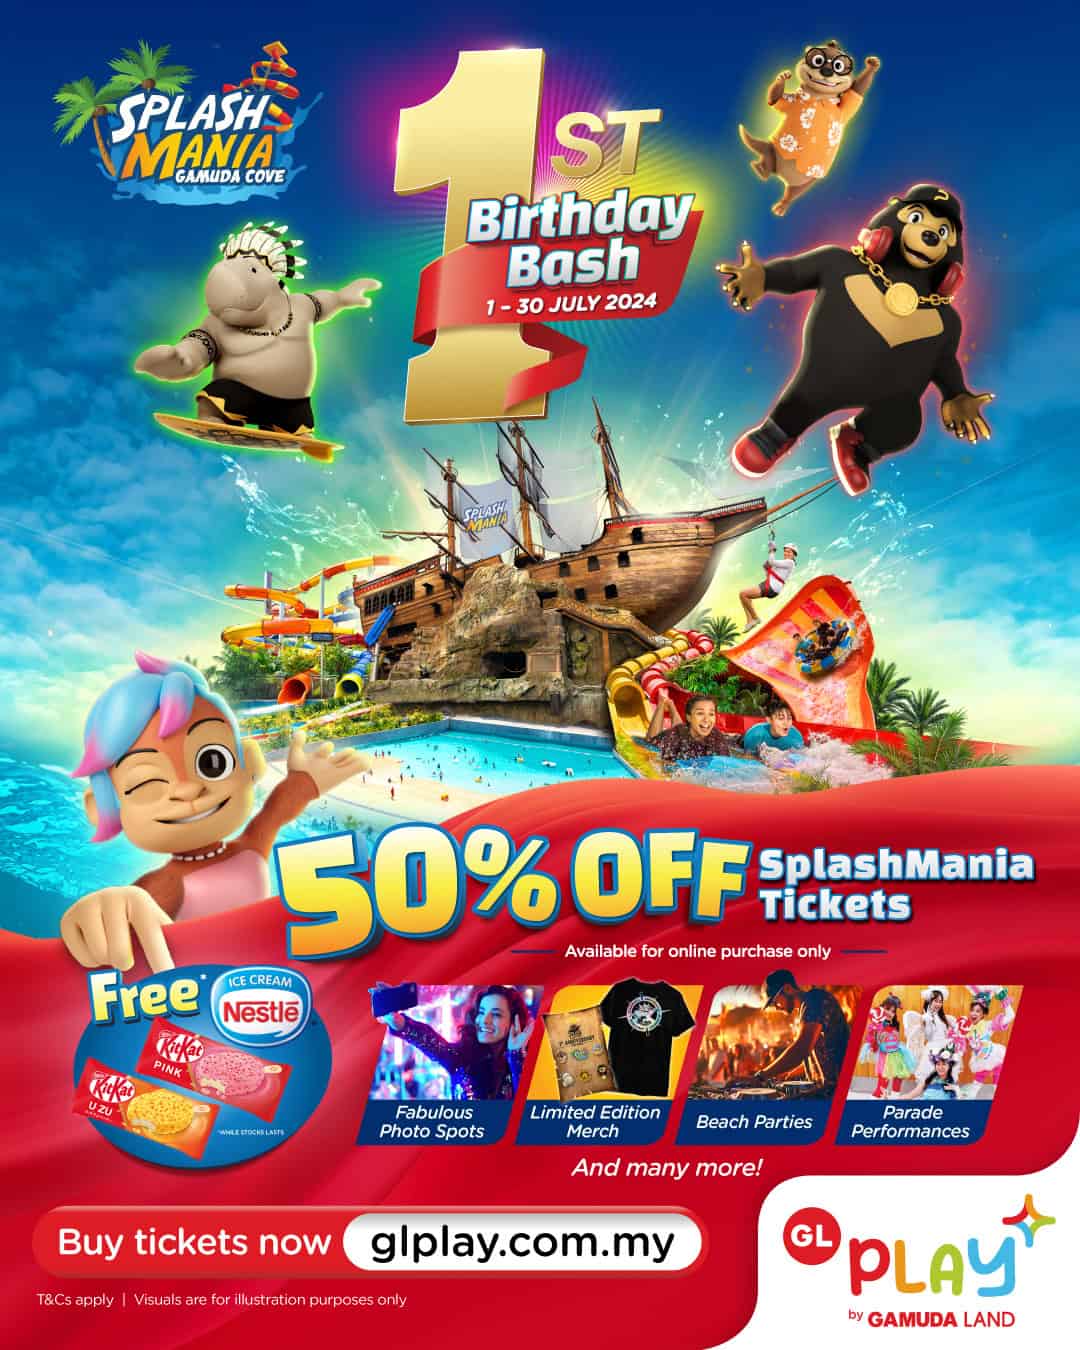 SplashMania Waterpark Welcomes Its 1st Anniversary with A Birthday Bash!